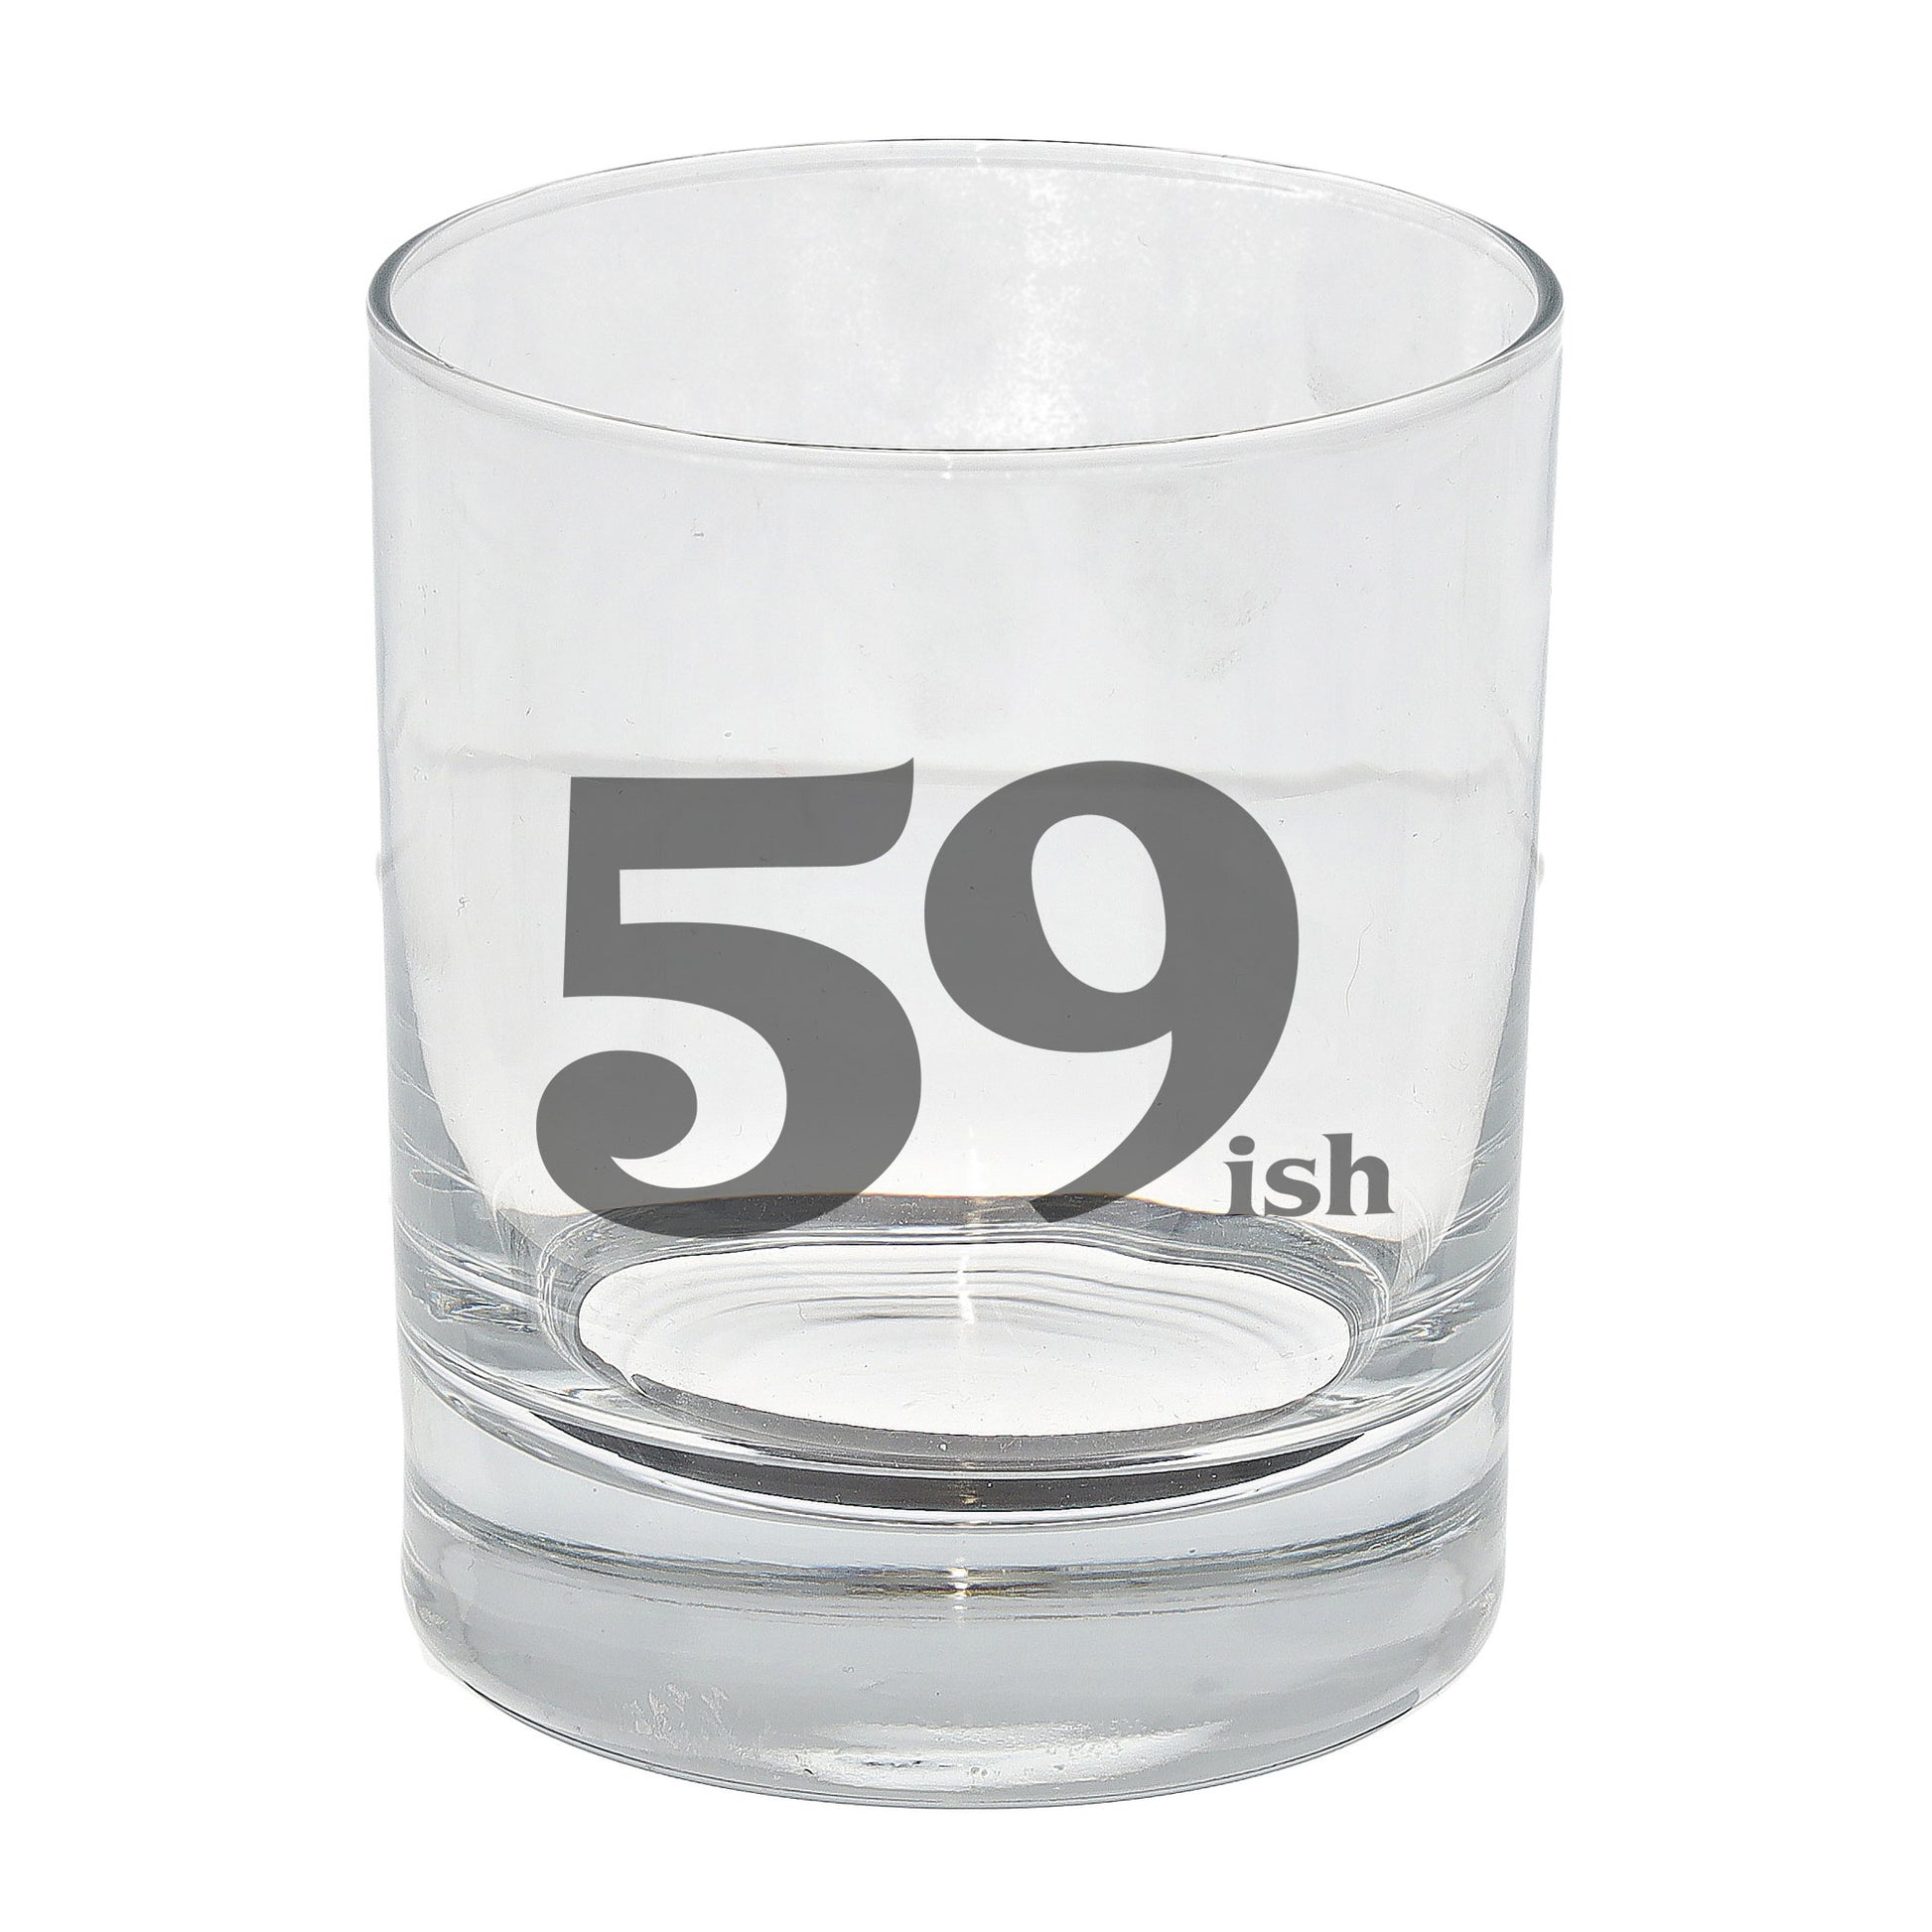 59ish Whisky Glass and/or Coaster Set  - Always Looking Good - Whisky Glass On Its Own  